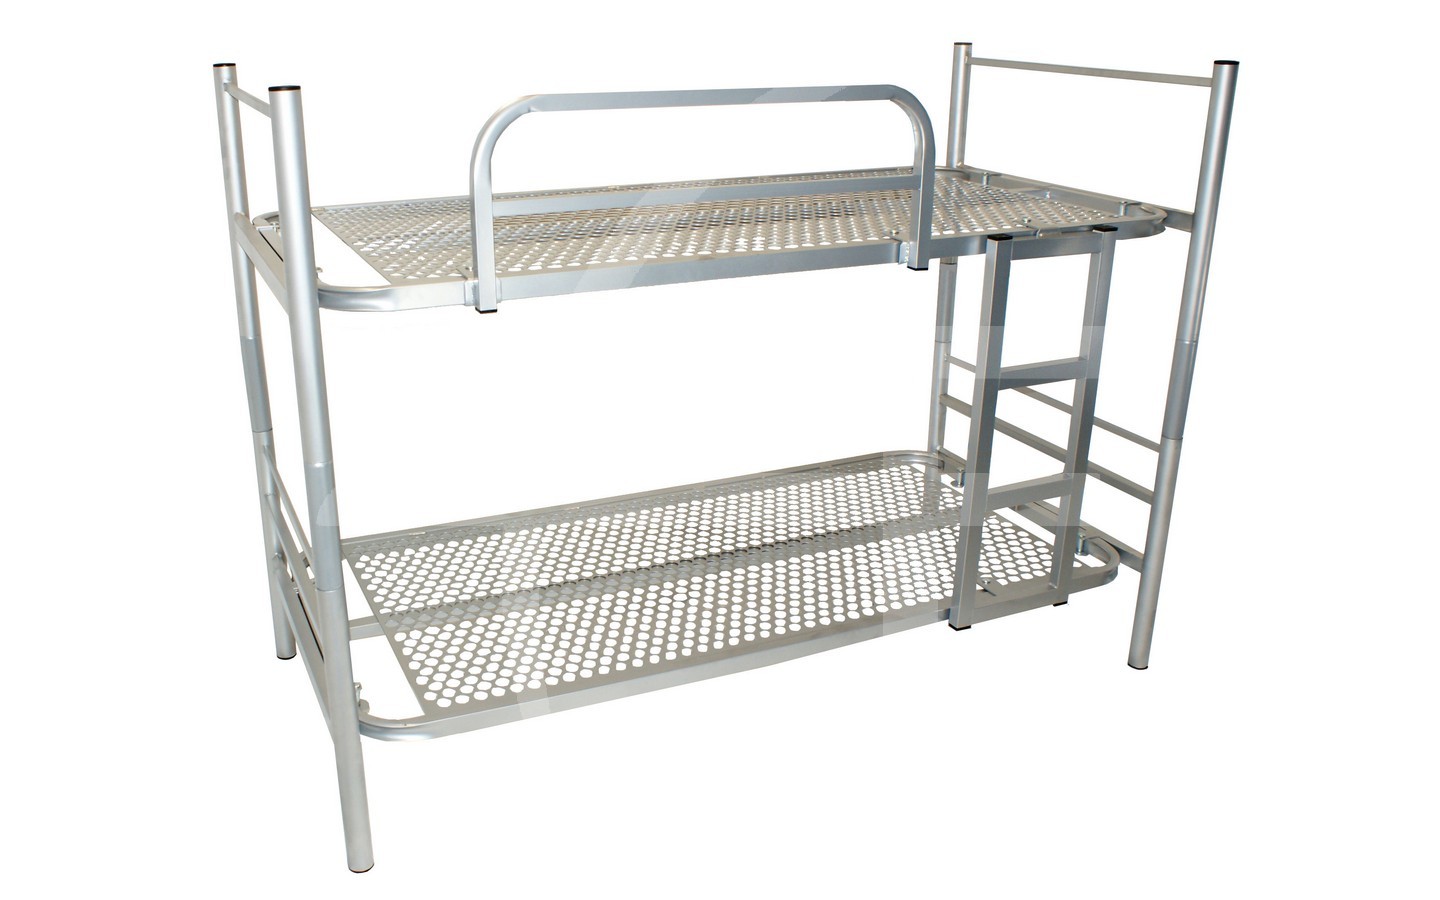 Bunk Beds For S Steel, Colorful Metal Bunk Beds